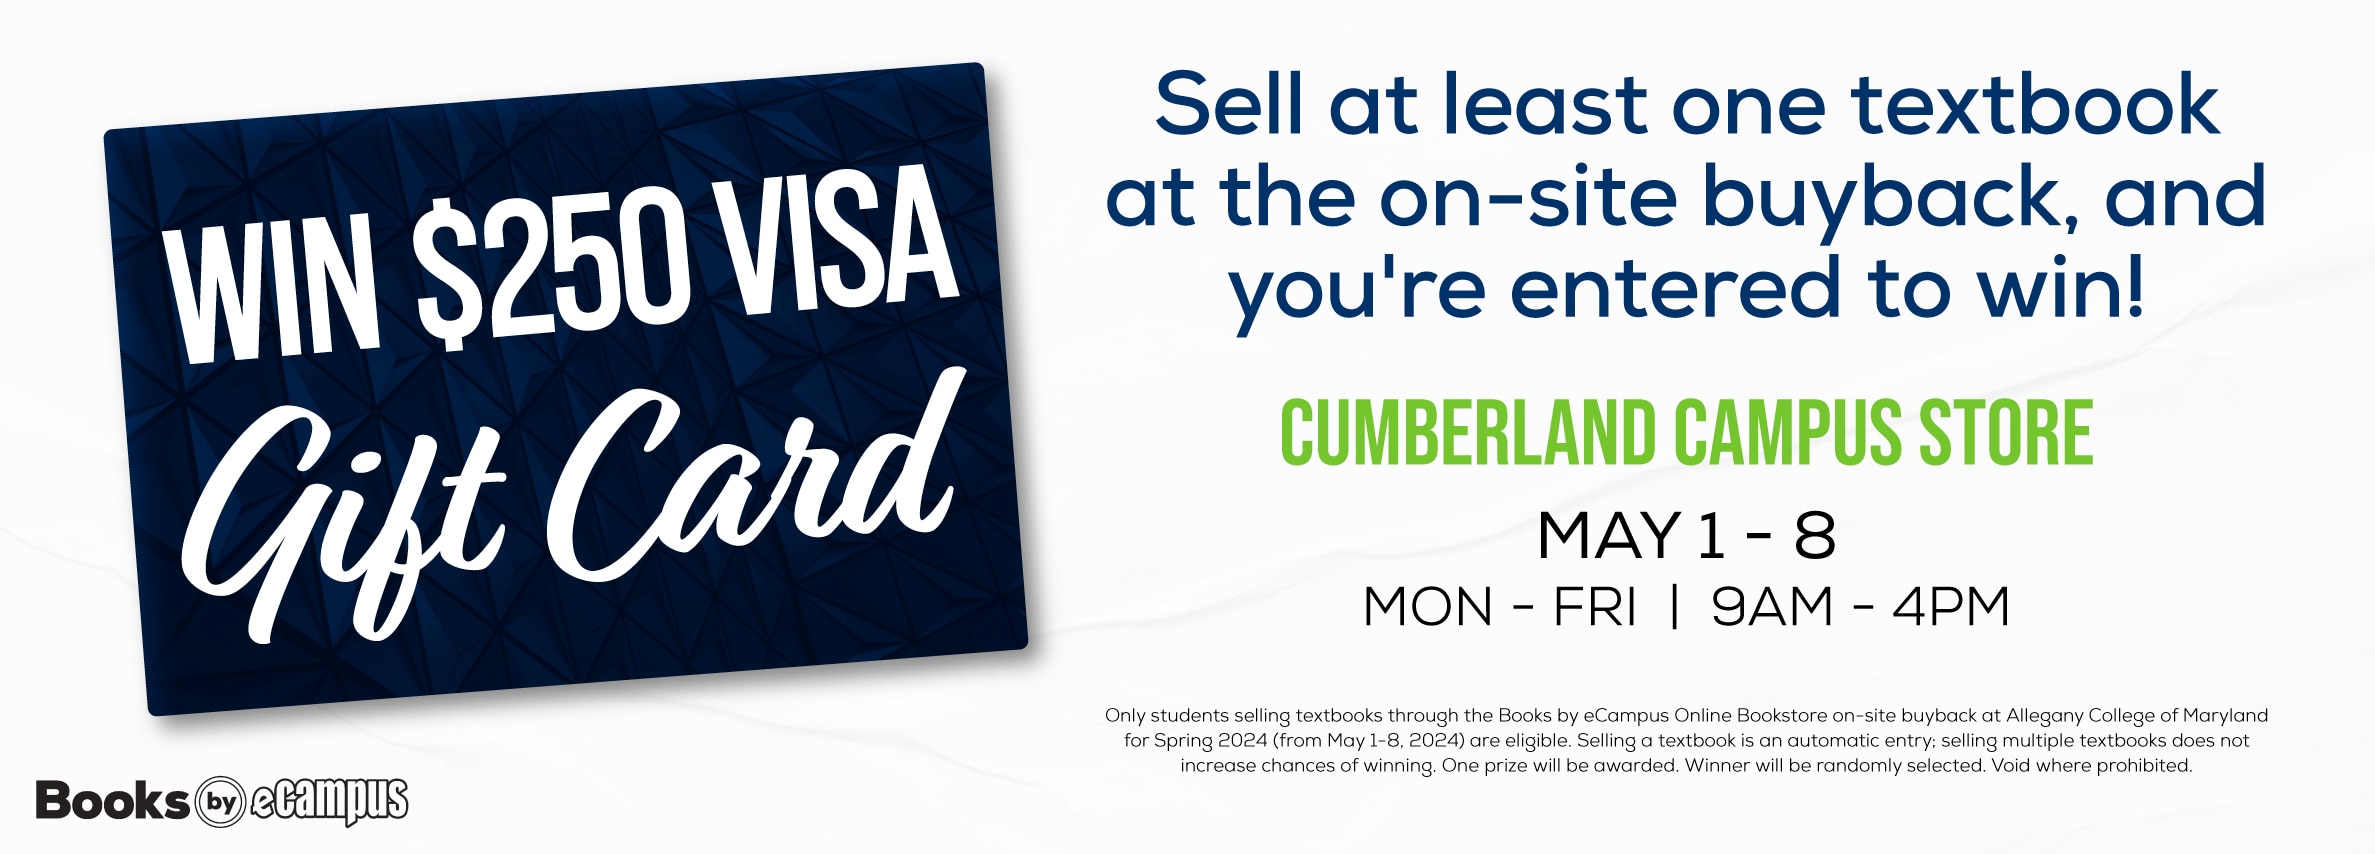 Win a $250 Visa Gift Card by selling at least one textbook at the on-site buyback! Visit the Cumberland Campus Store from May 1st to May 8th, between 9am and 4pm, Monday through Friday.